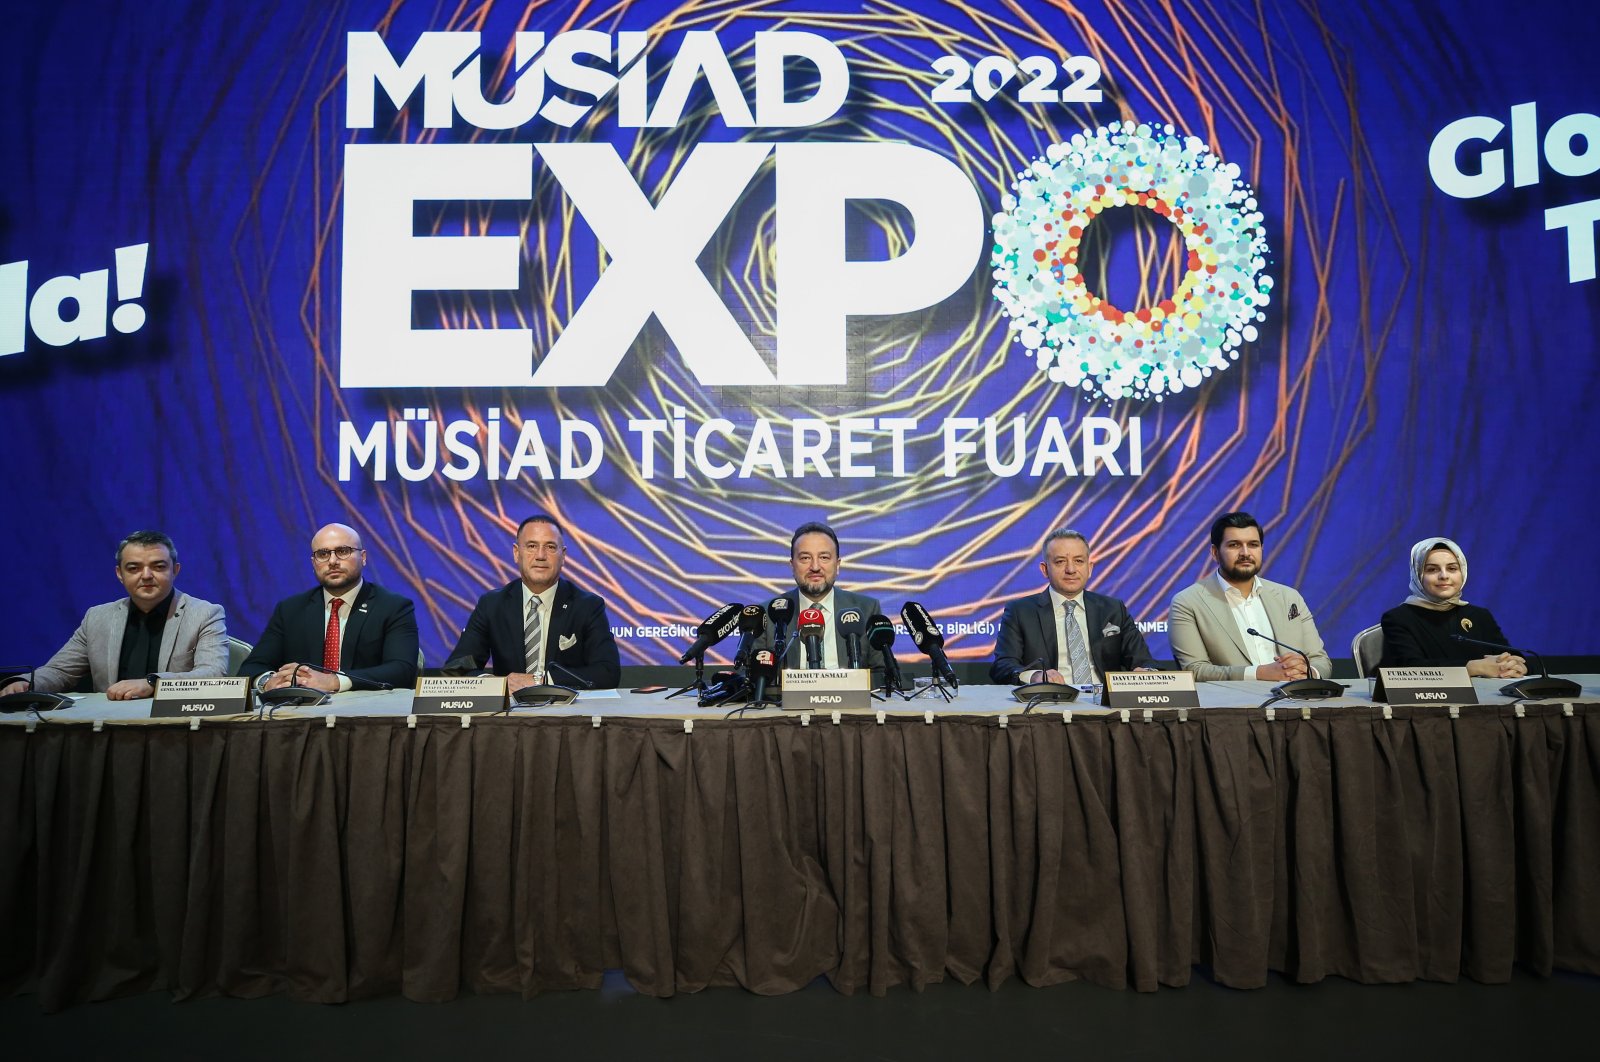 Mahmut Asmalı (C), the head of the Independent Industrialists and Businesspersons Association (MÜSIAD) and other executives during a meeting with press members in Istanbul, Türkiye, Oct. 13, 2022. (Courtesy of MÜSIAD)